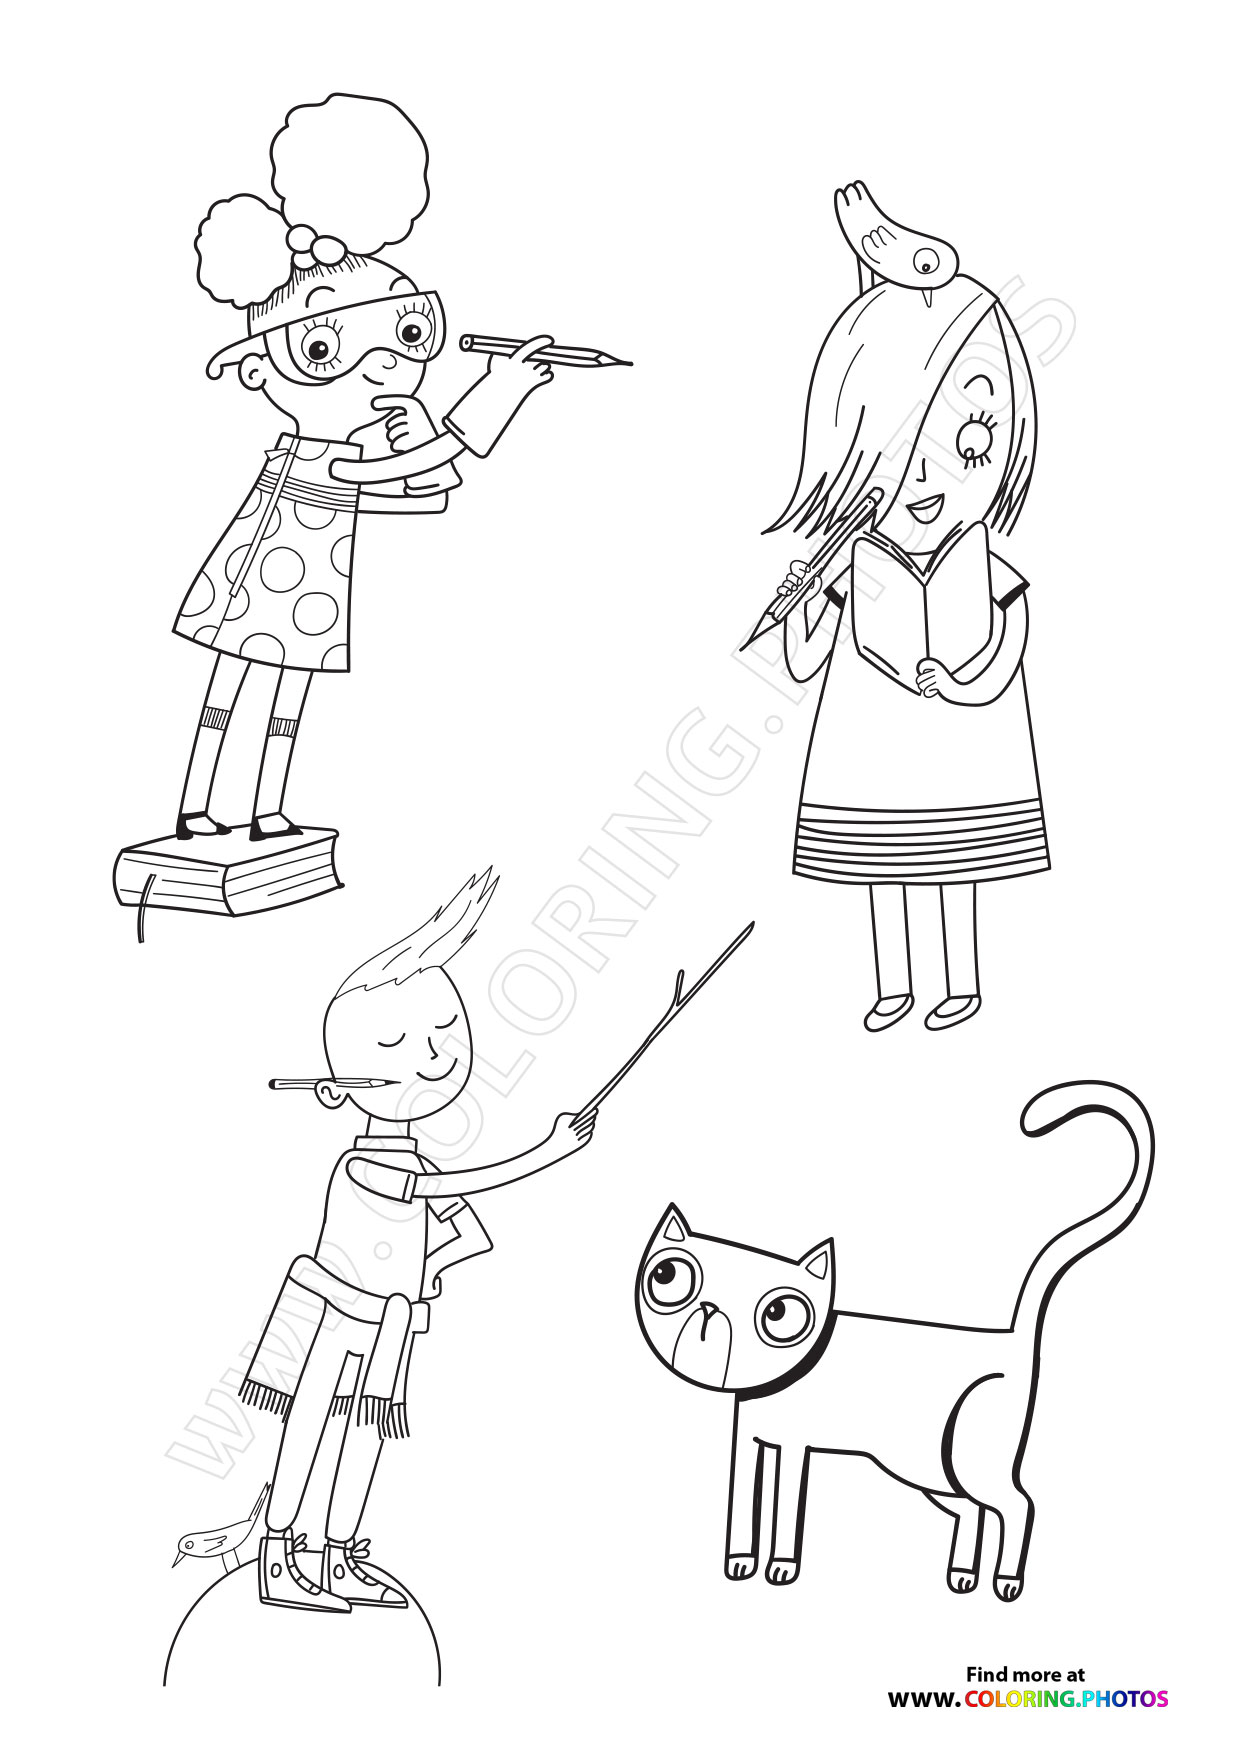 Ada Twist with friends - Coloring Pages for kids